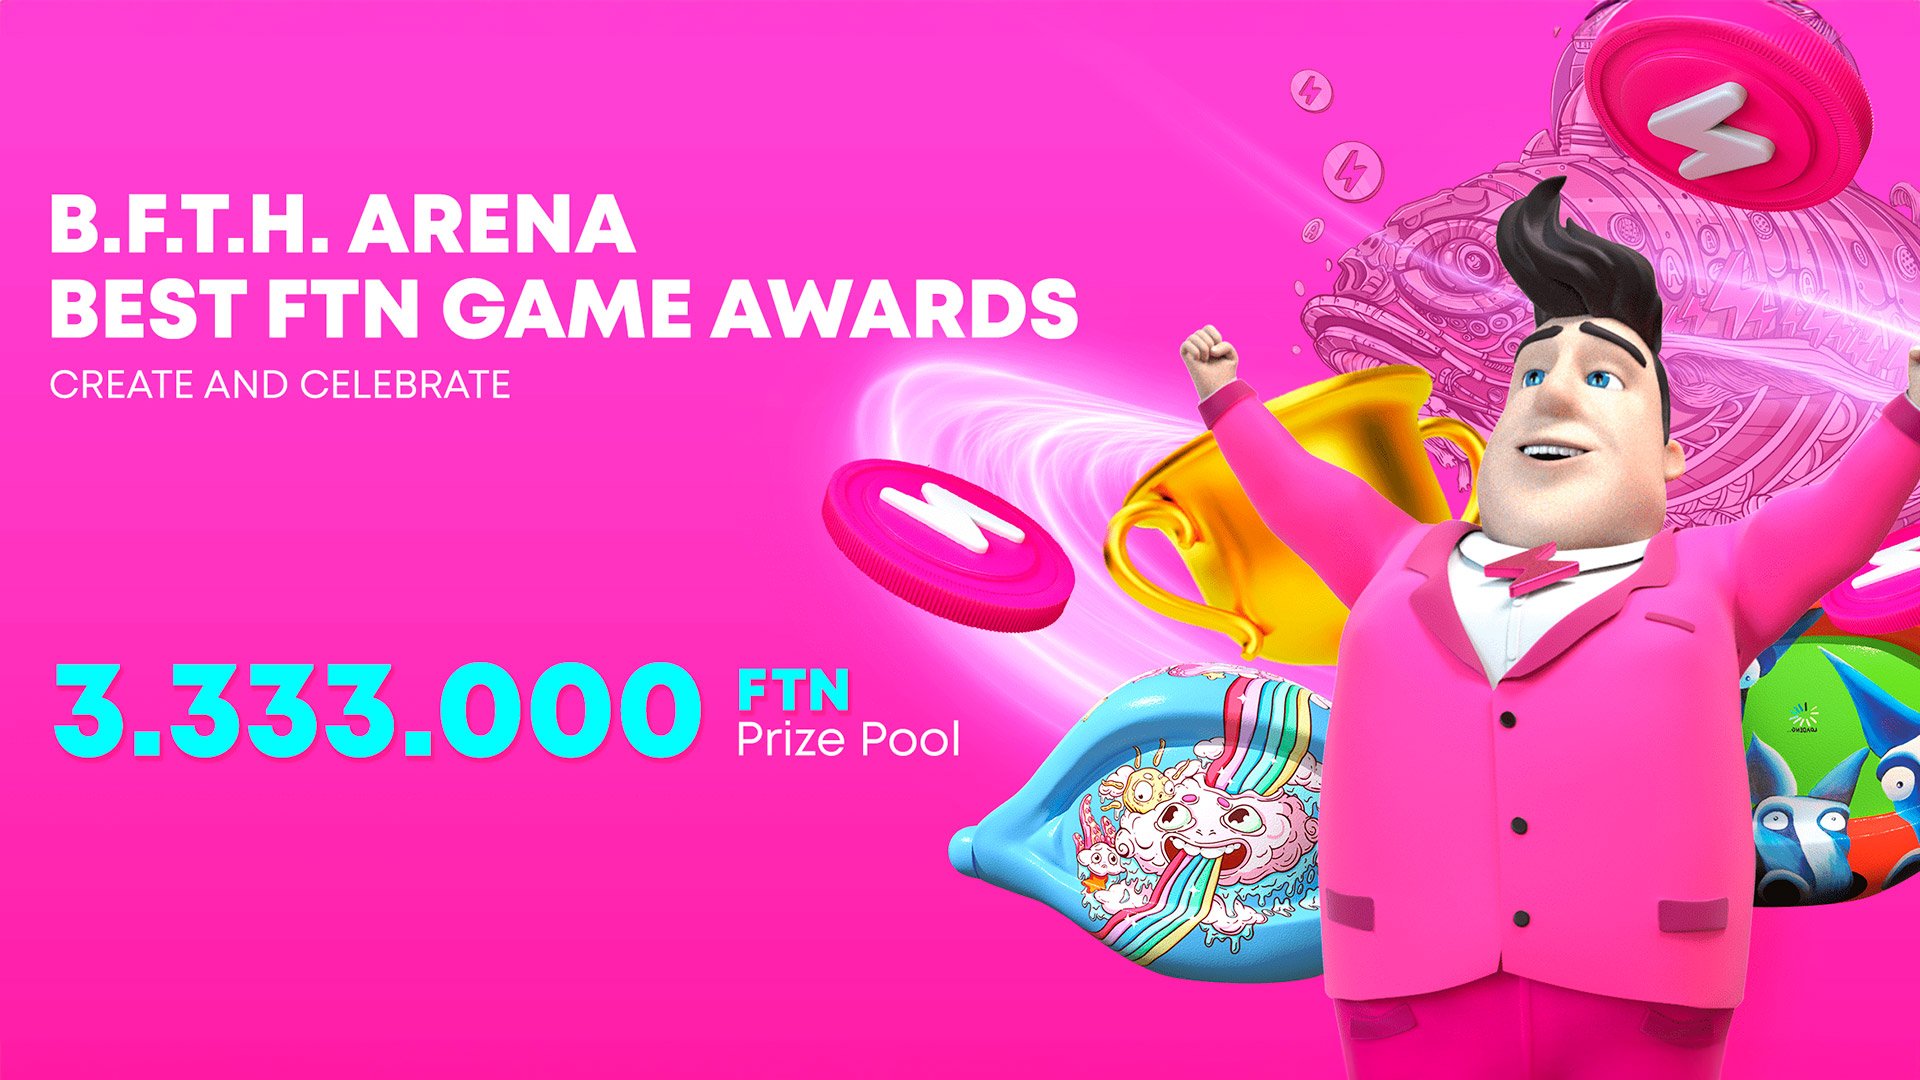 BetConstruct set to host game awards with 3.3 million FTN prize pool